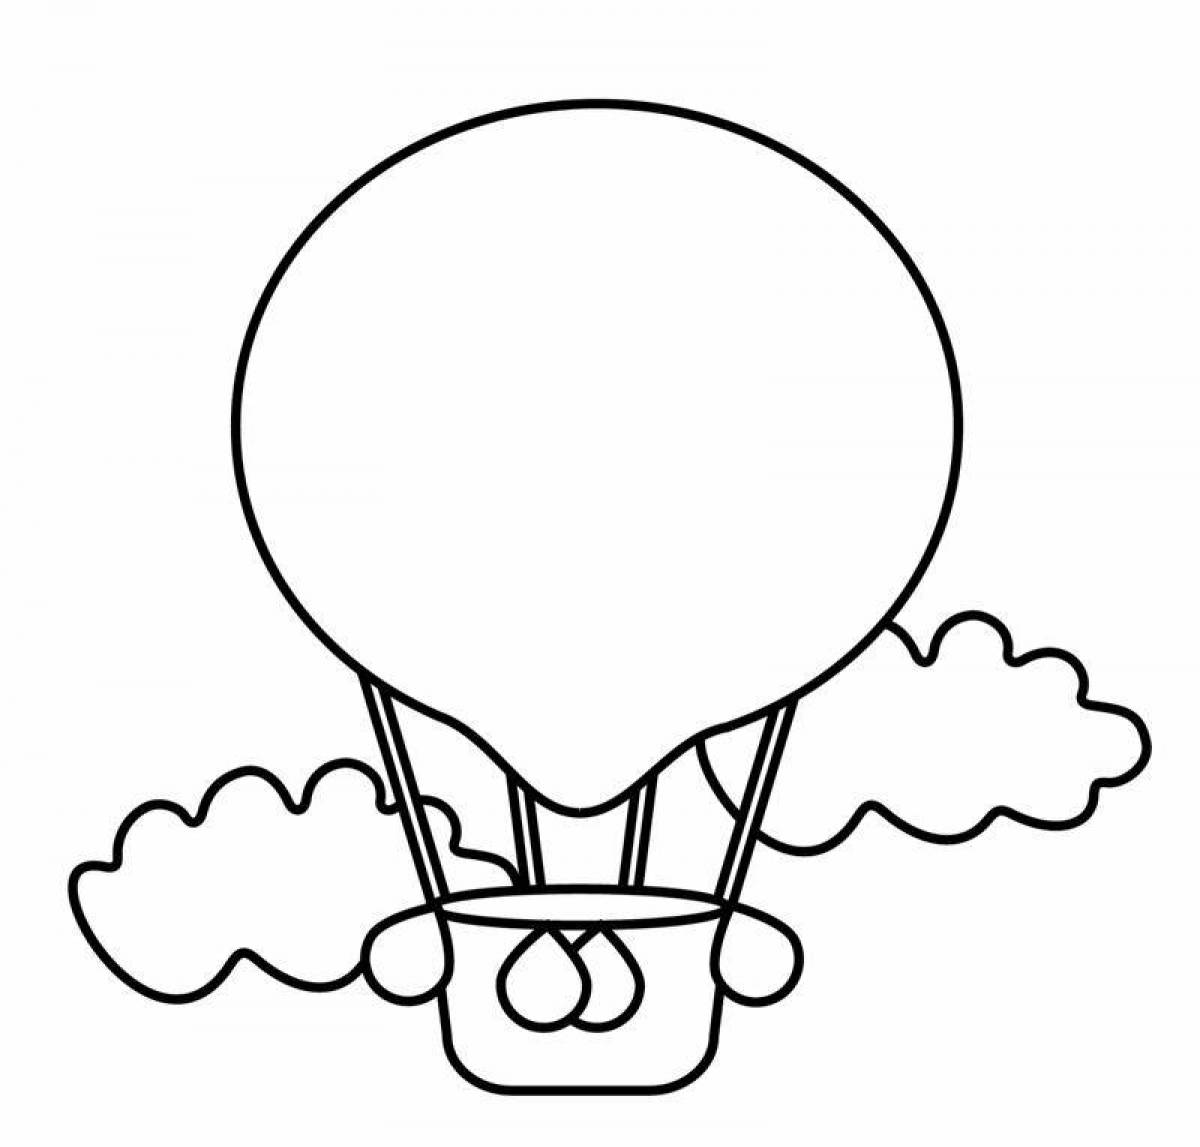 Coloring page joyful balloon with a basket